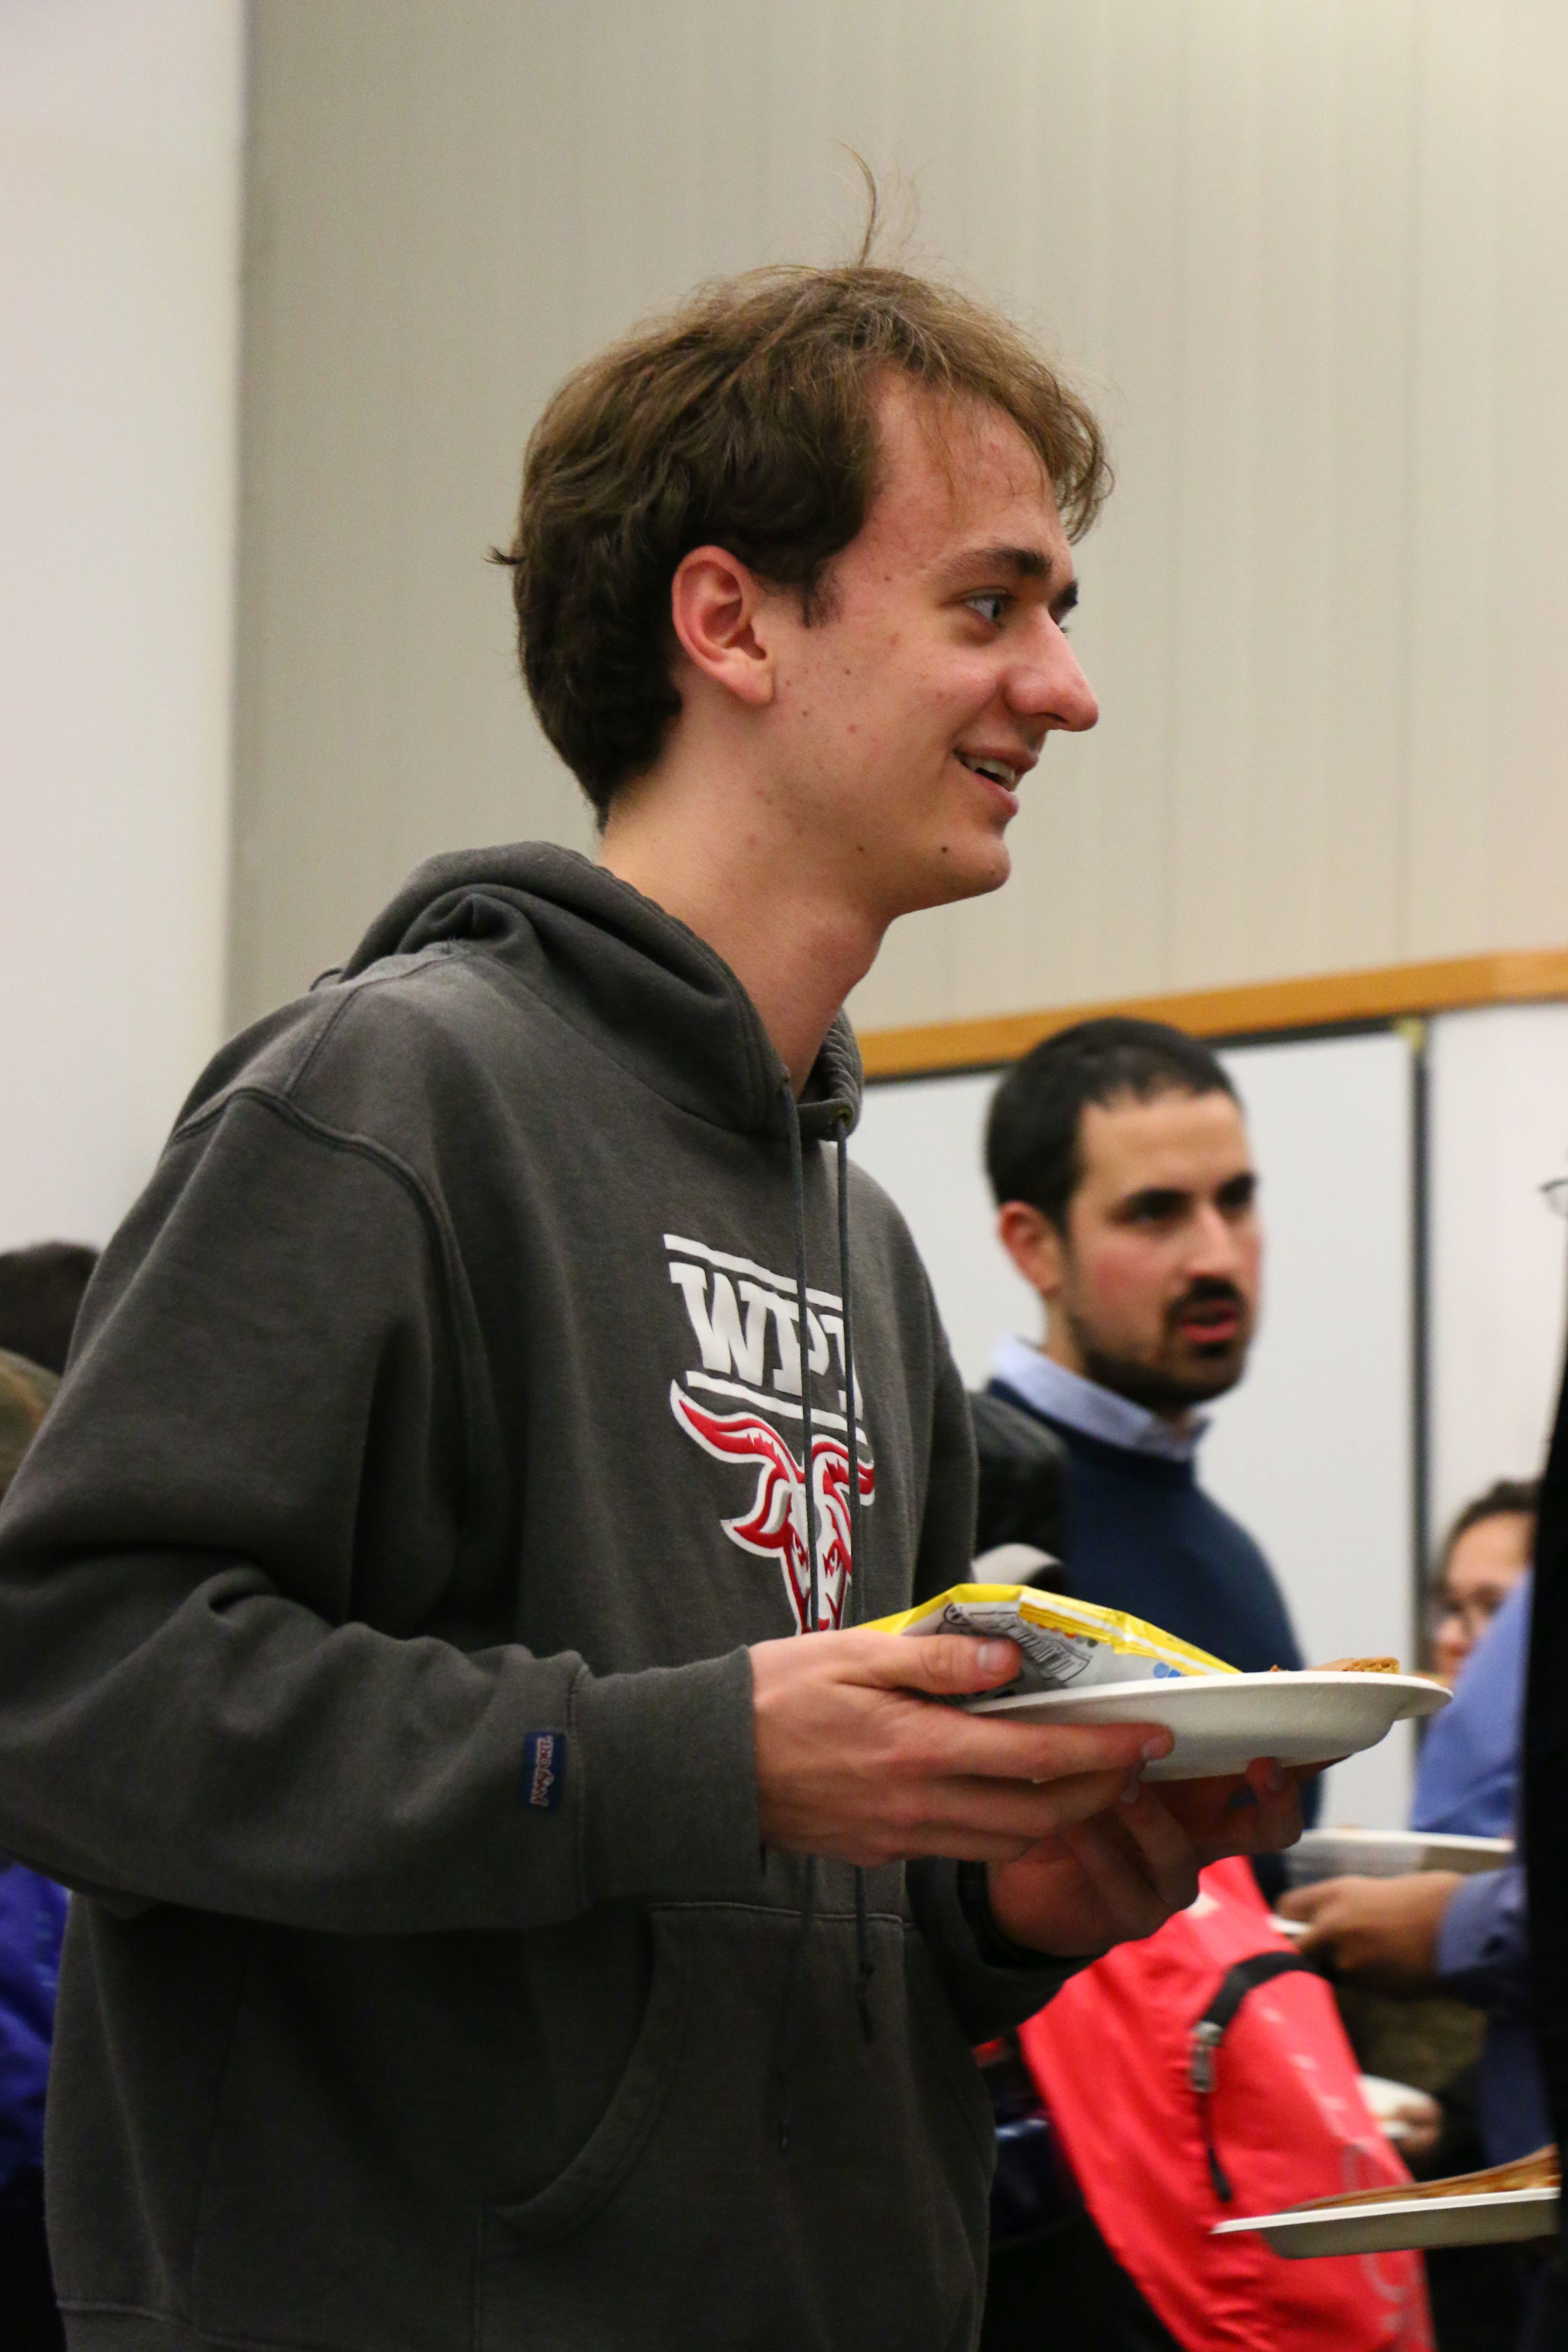 Student at a holiday open house